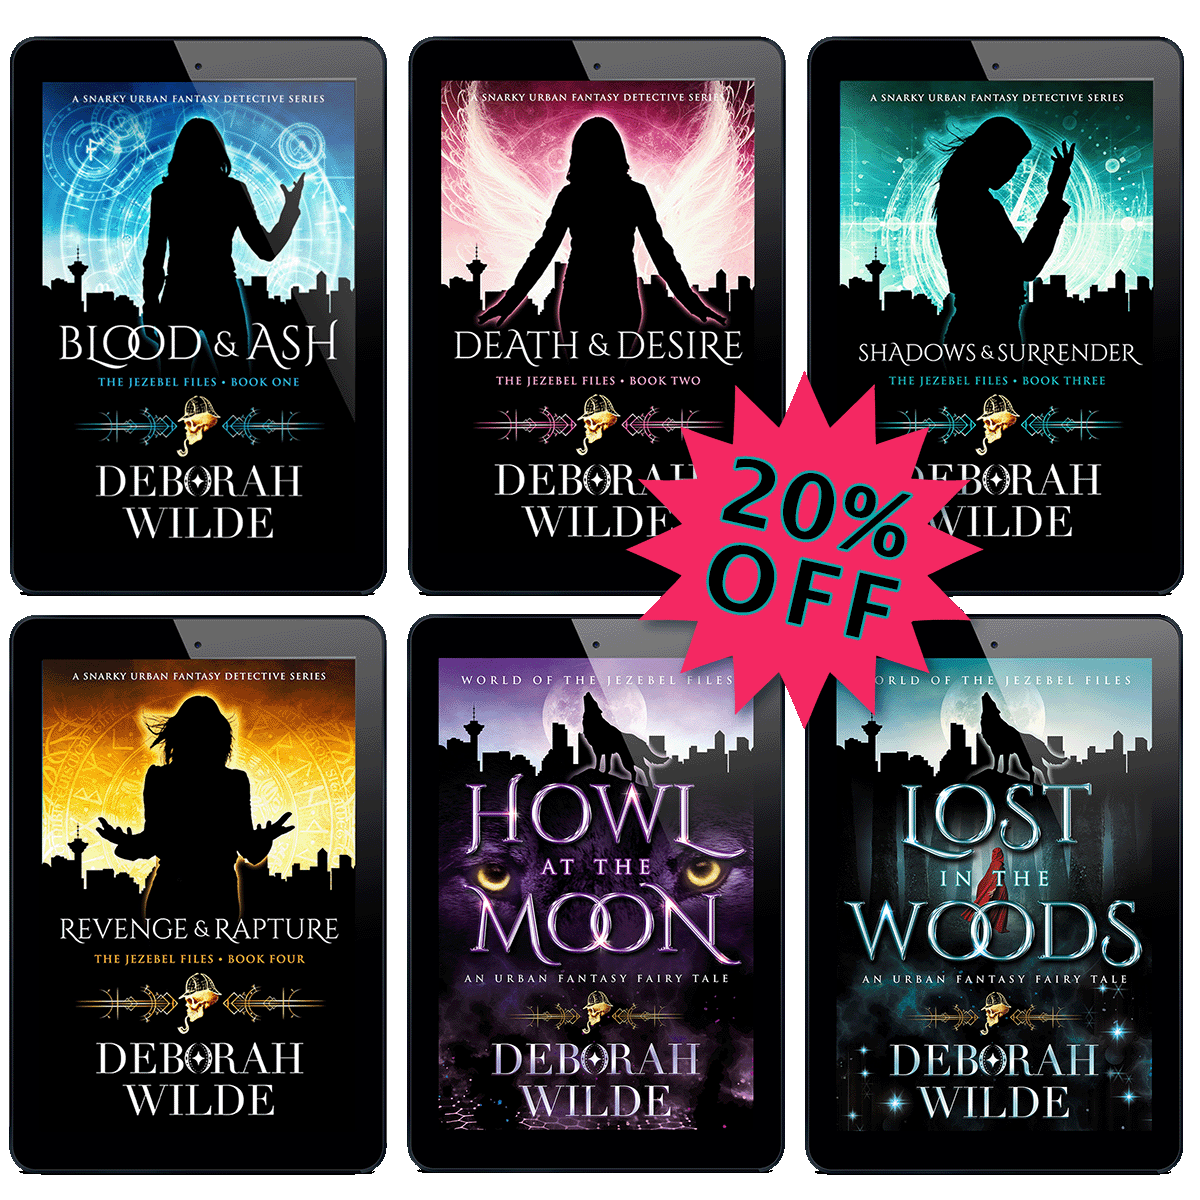 20% off all 6 ebooks in the Jezebel Files and World of the Jezebel Files by urban fantasy author Deborah WIlde.